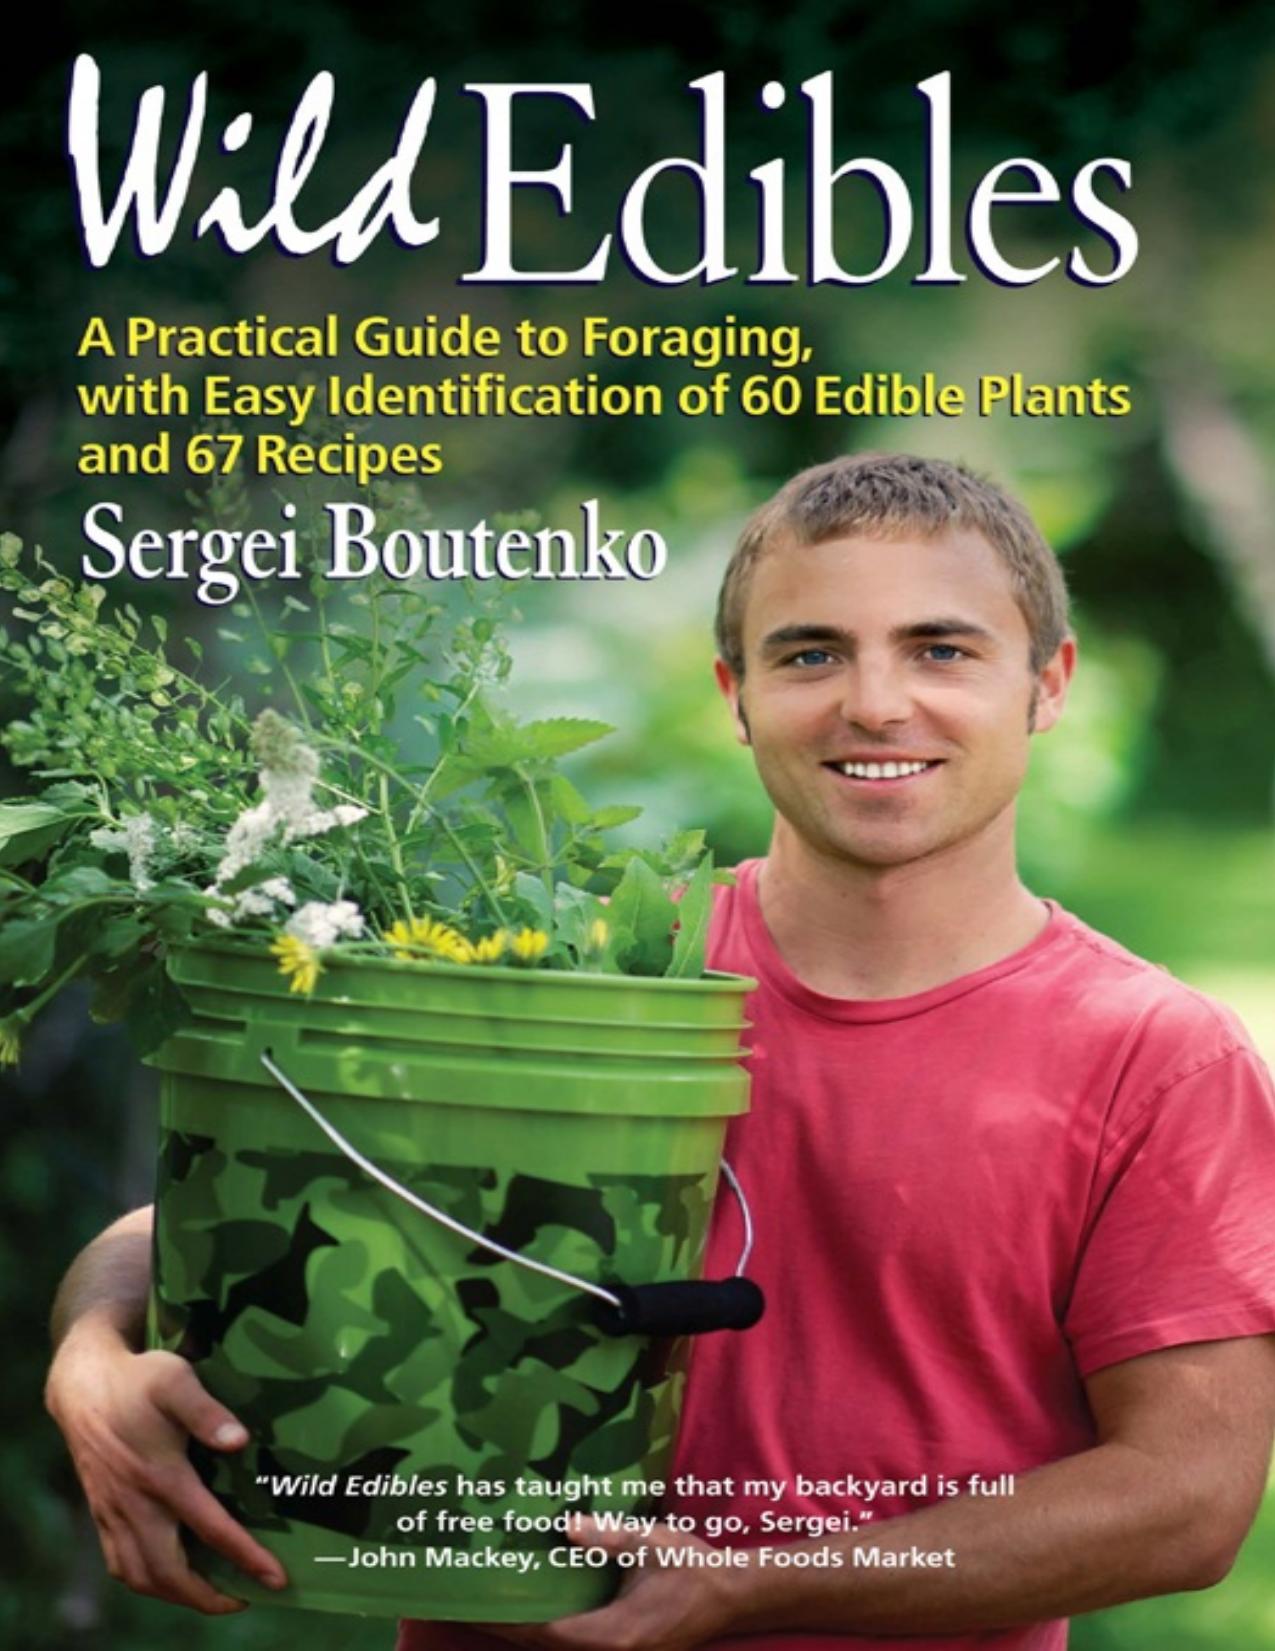 Wild edibles : a practical guide to foraging, with easy identification of 60 edible plants and 67 recipes - PDFDrive.com